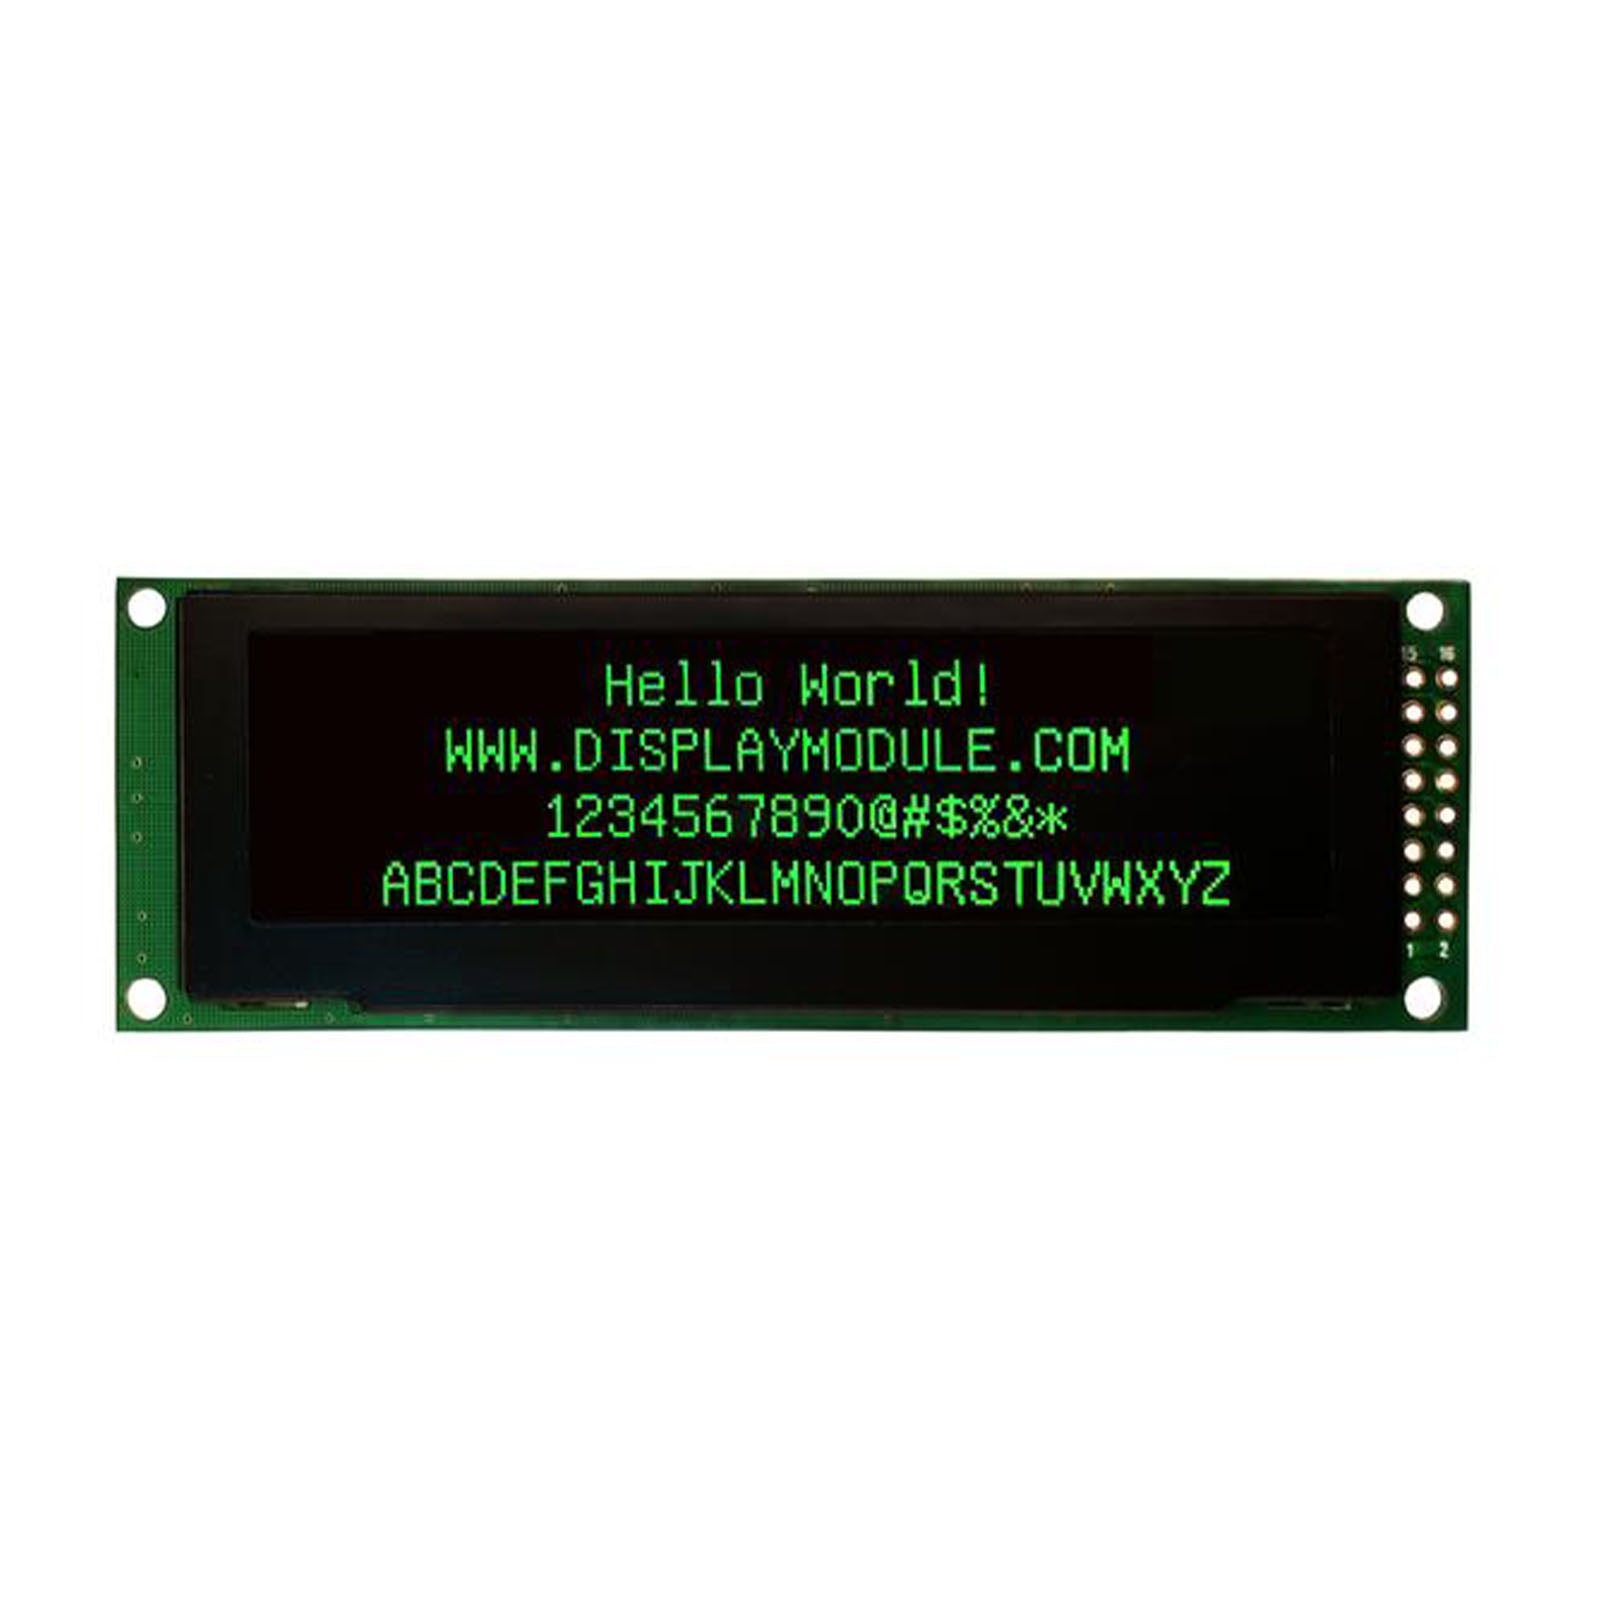 3.2 inch 256x64 green OLED screen displaying the text 'Hello World!'